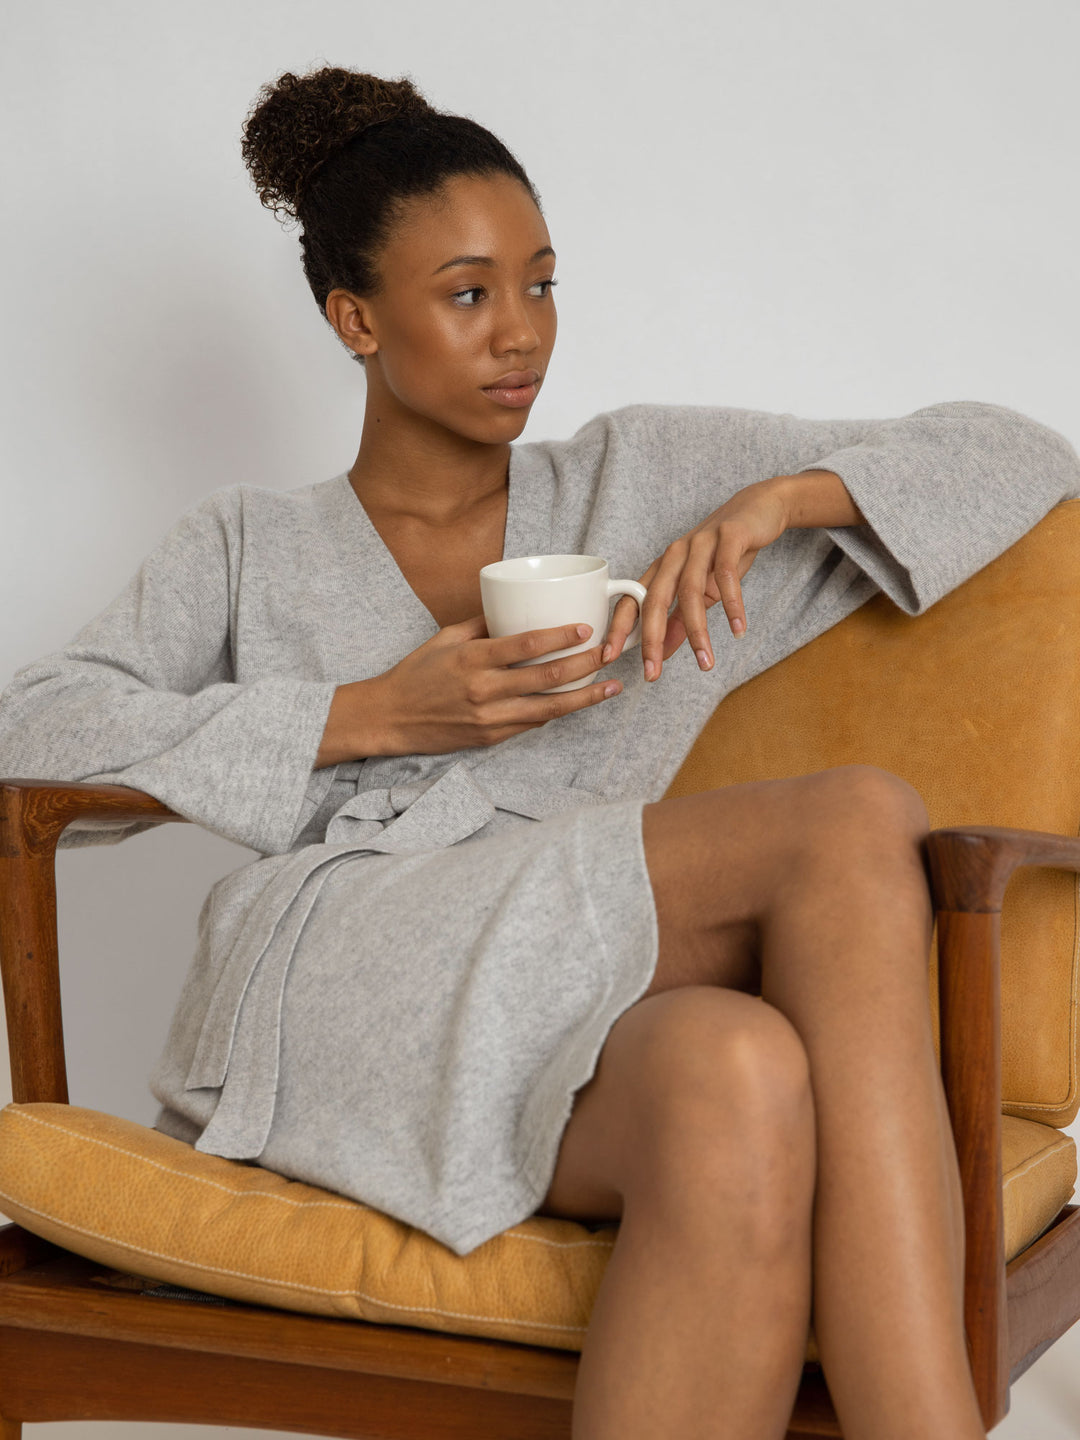 Morning robe Classic in 100% cashmere by Kashmina. Scandinavian design. Color: light grey.